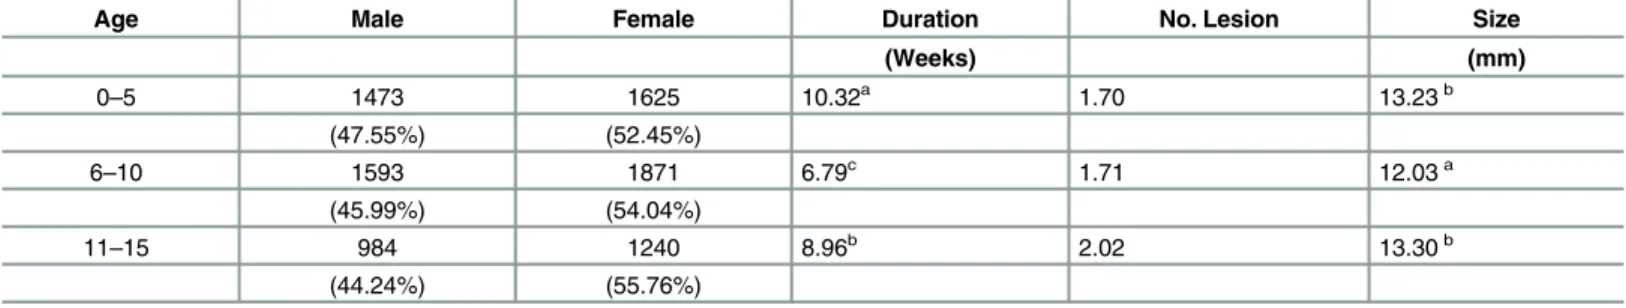 Table 2. Distribution of age, gender, duration (weeks), number of lesions, and lesion size (mm) of pediatric cutaenous leishmaniasis patients